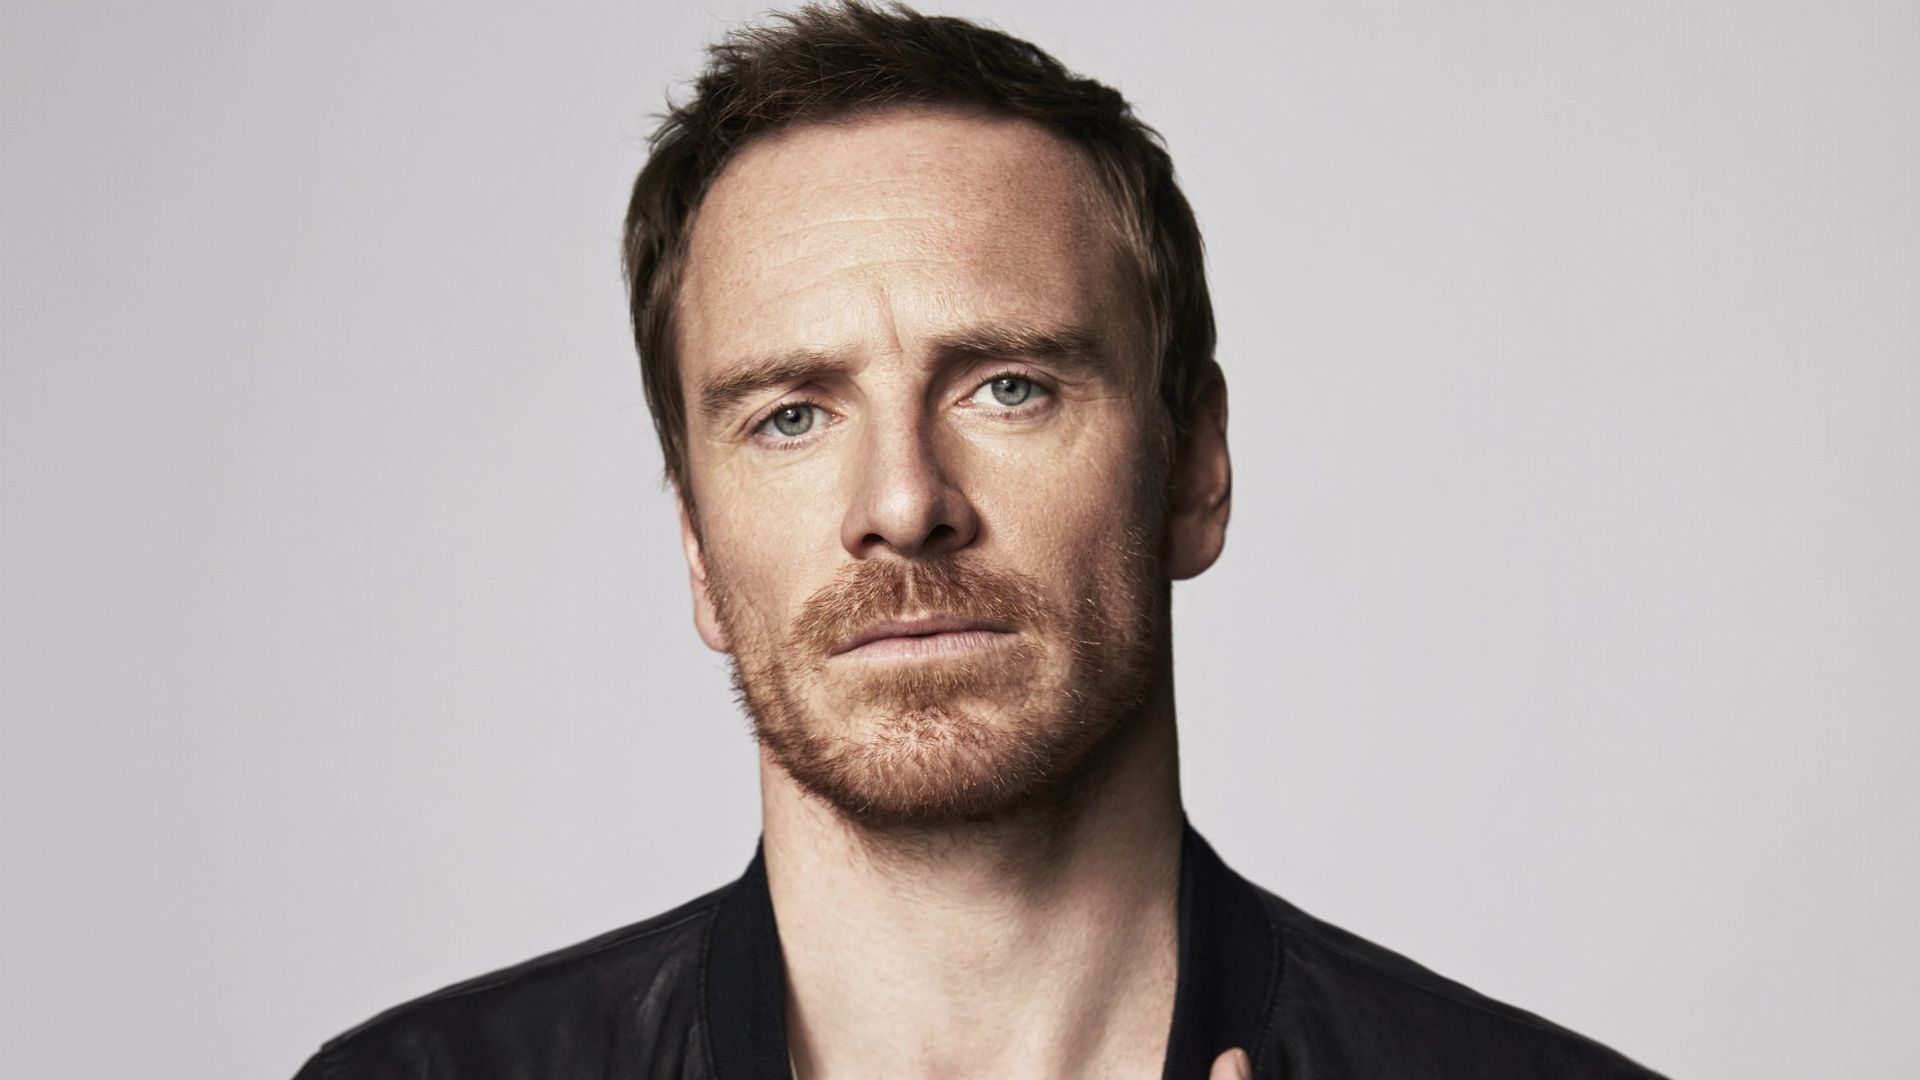 Michael Fassbender is of Irish and German descent